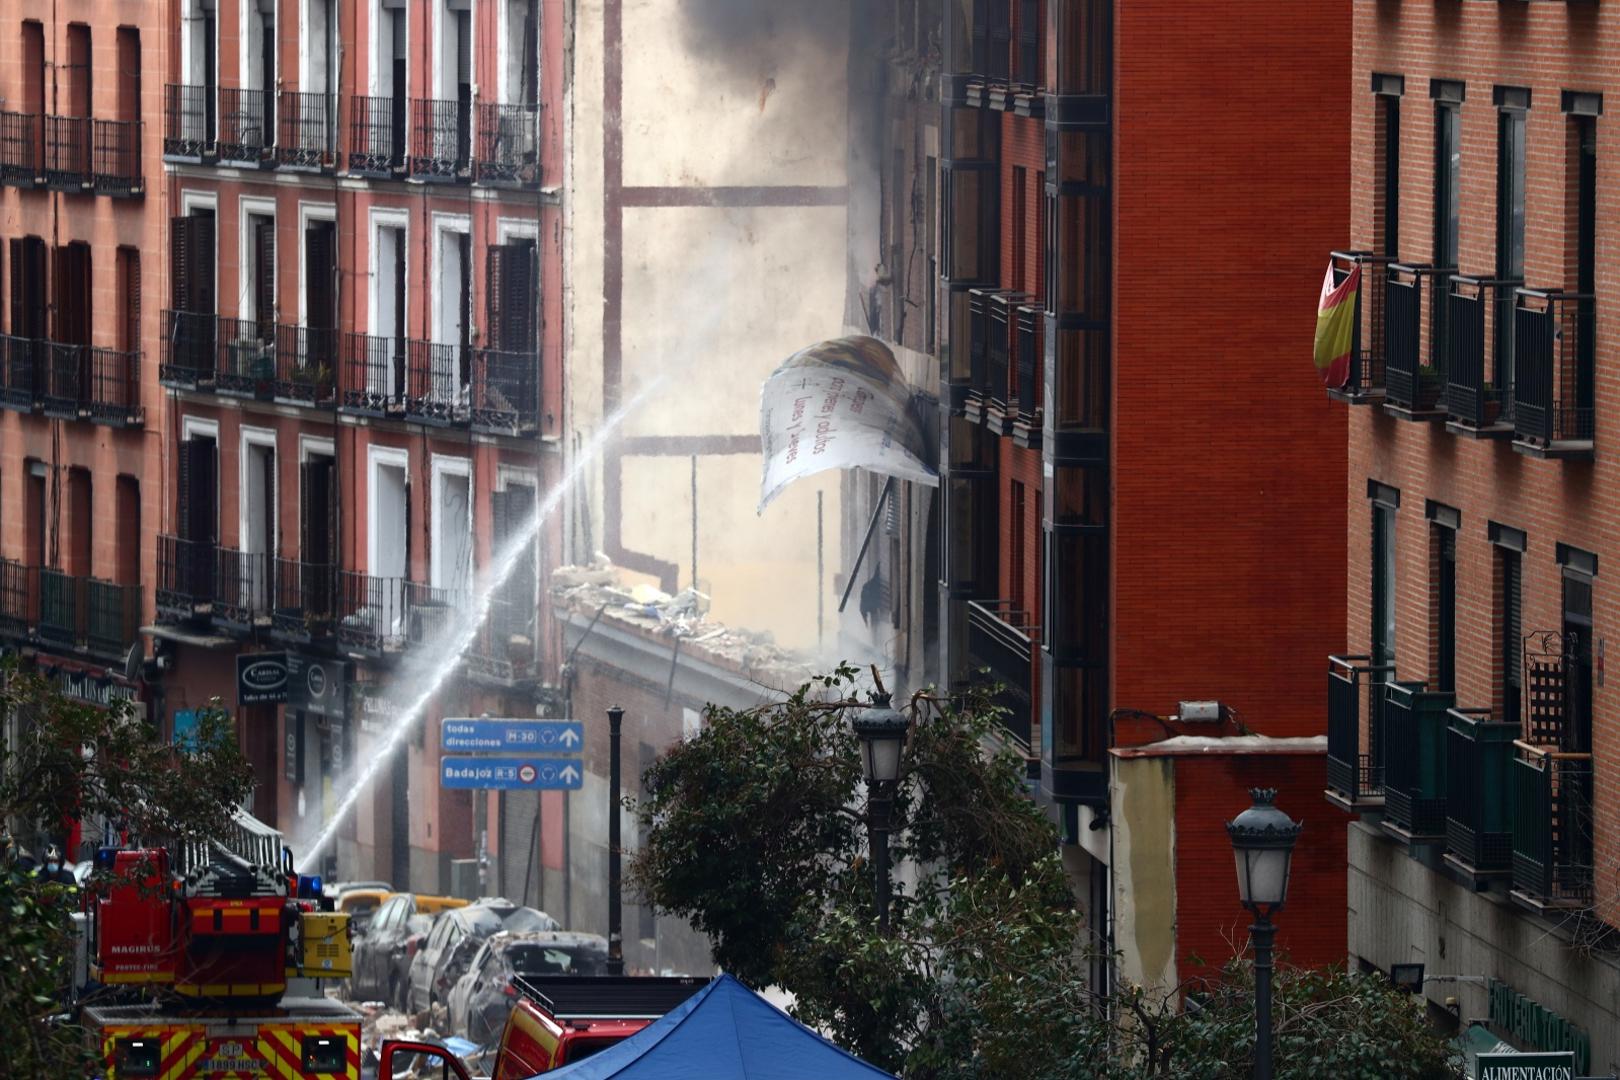 Explosion in Madrid downtown Firefighters spray water on a building belonging to the Catholic Church, following a deadly explosion, in Madrid downtown, Spain, January 20, 2021. REUTERS/Sergio Perez SERGIO PEREZ